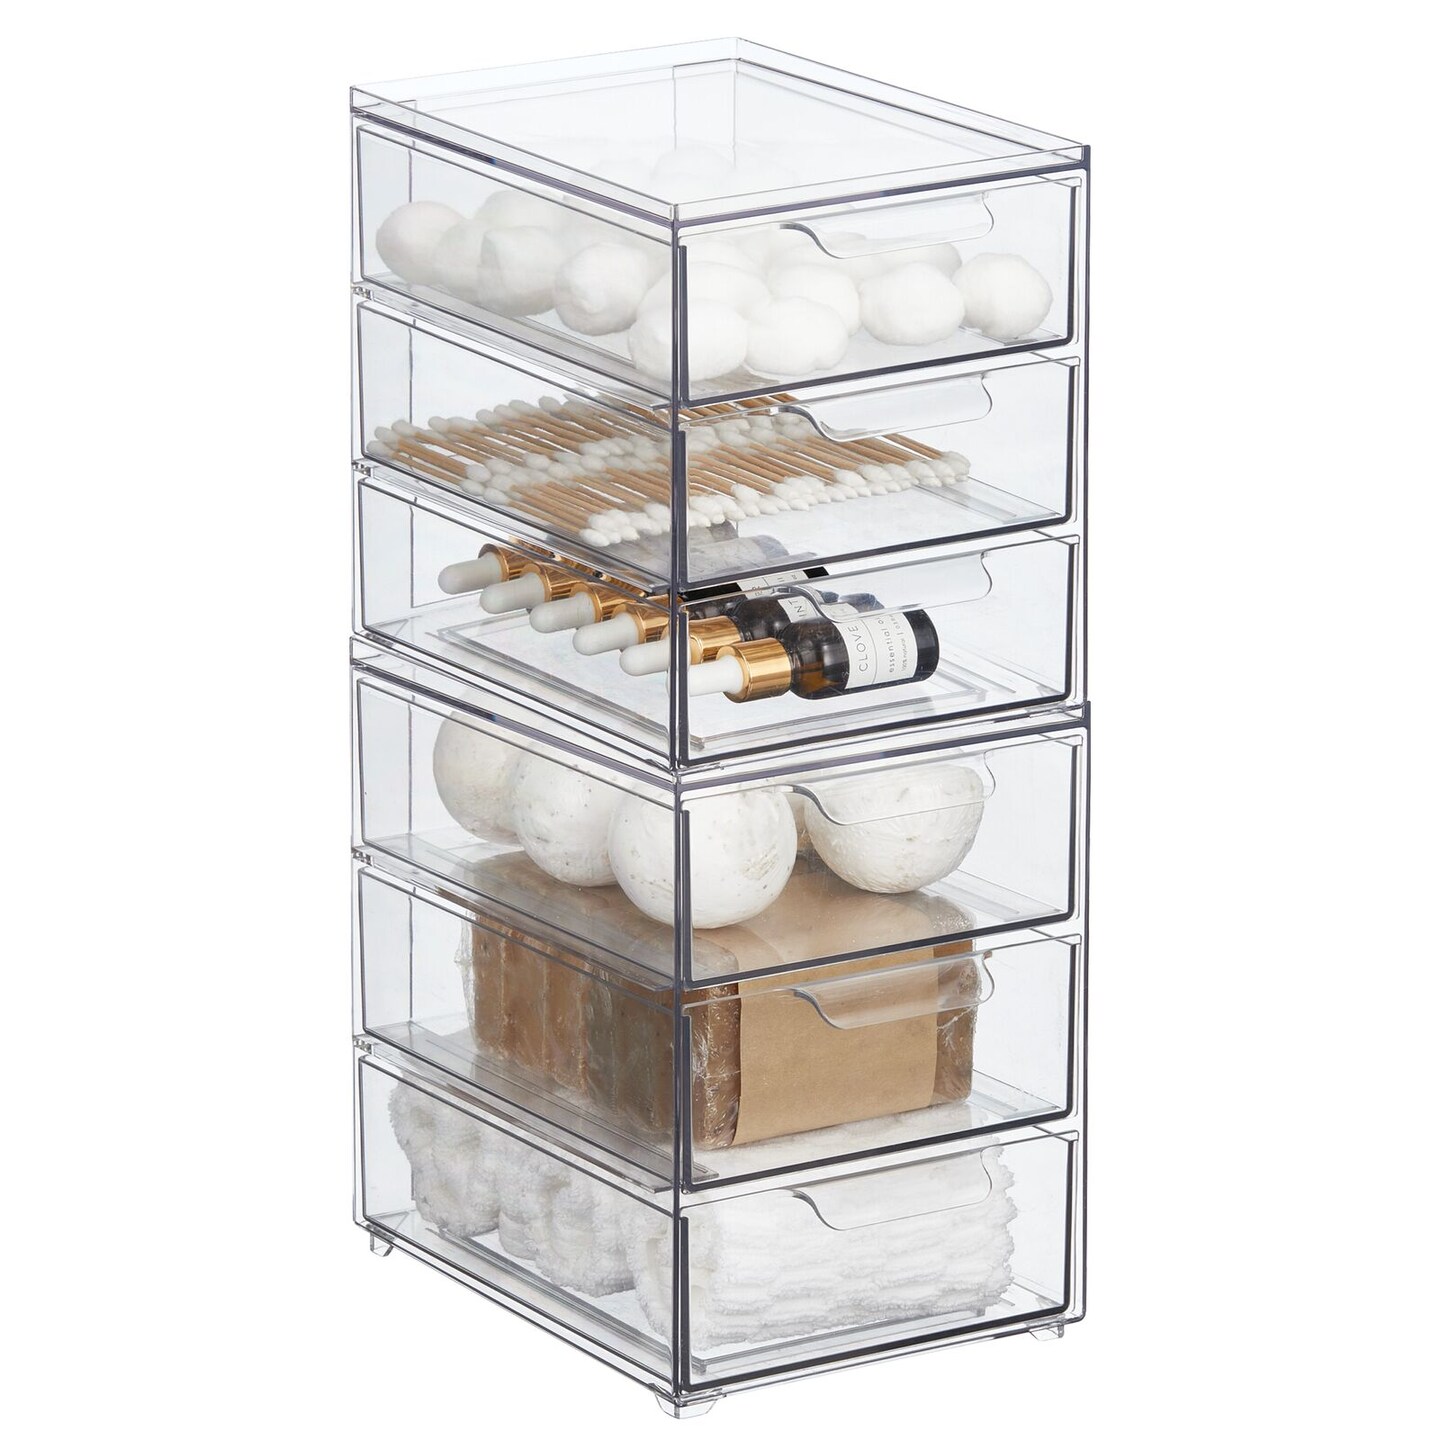 3-Pack Clear Fridge Drawer Organizer Bins - Pull-Out Storage Containers